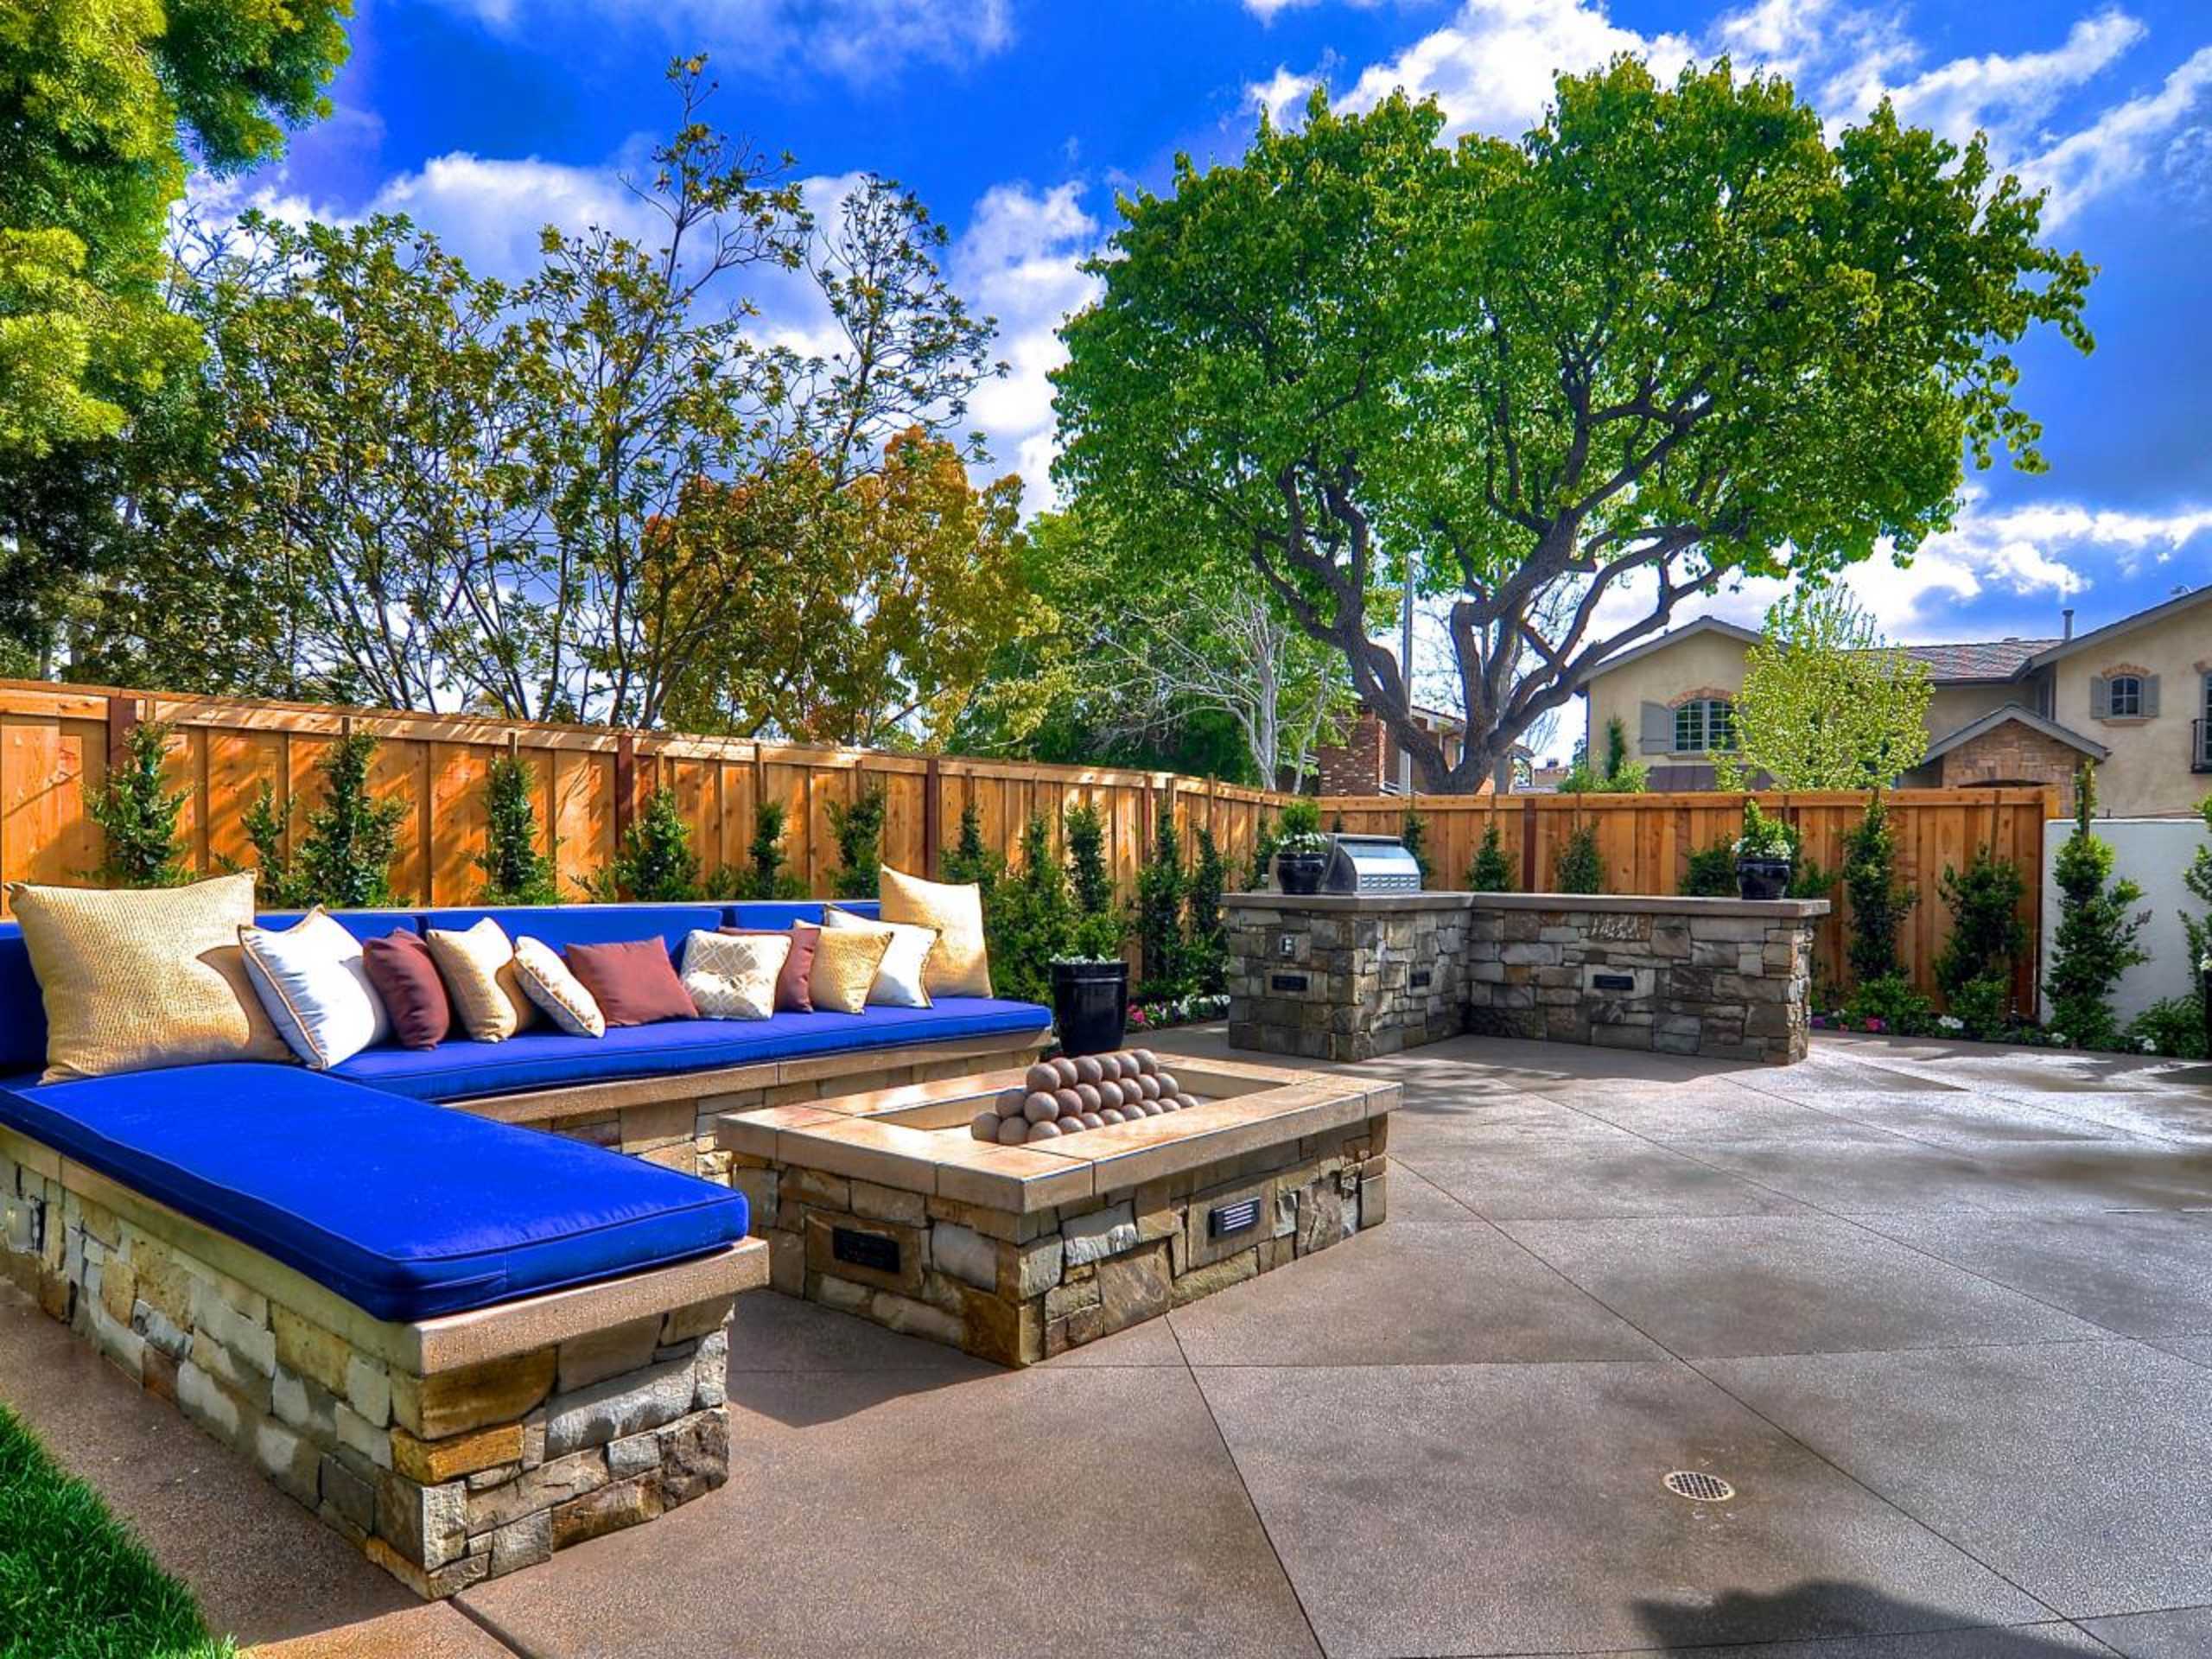 Find a Home with a Backyard Oasis to Vacation in Place